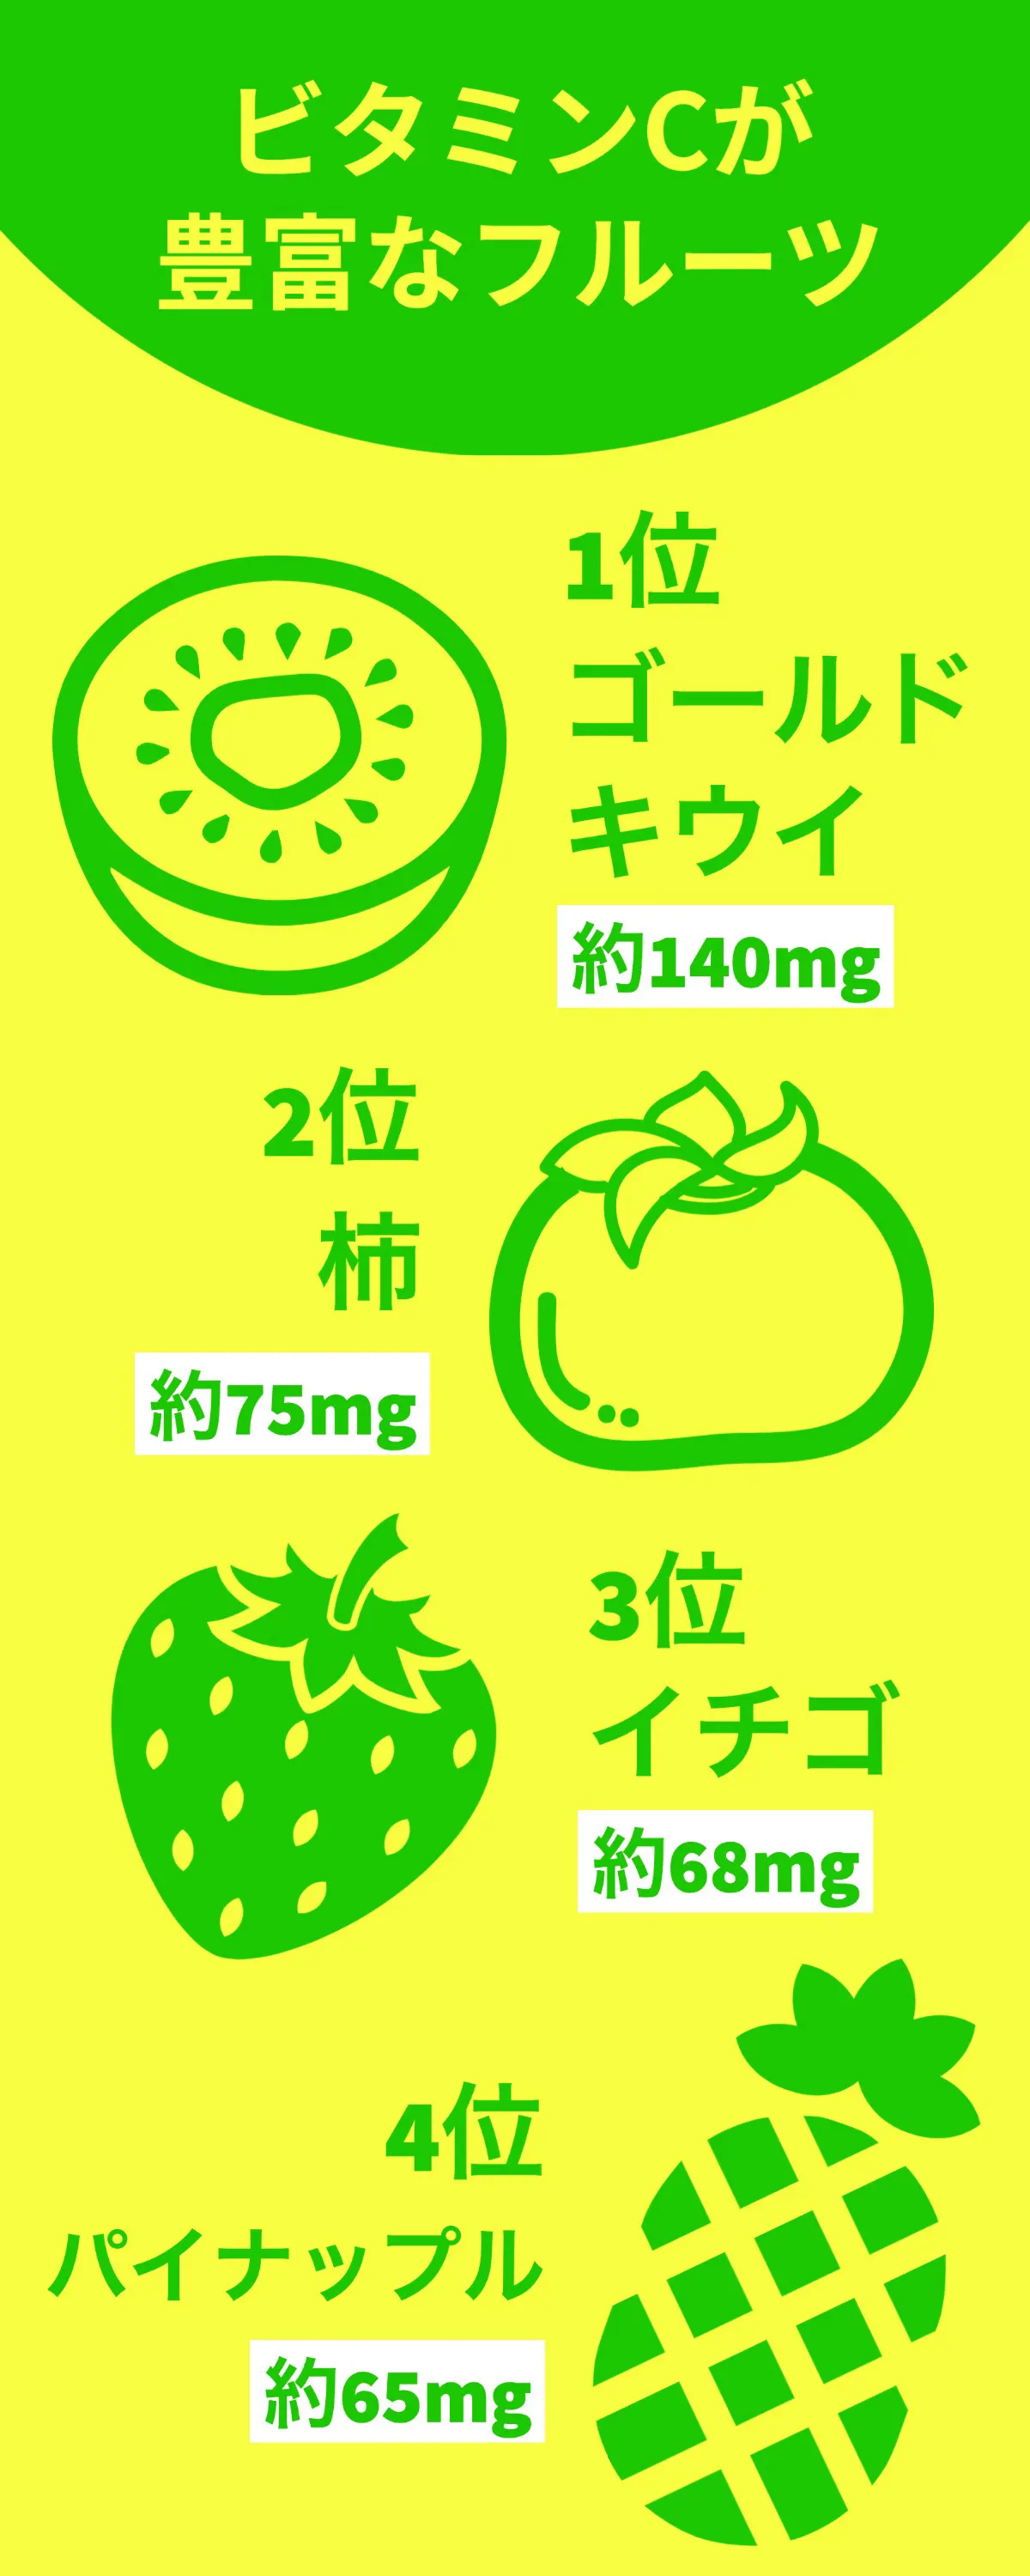 Vitamin C content ranking of fruits infographic